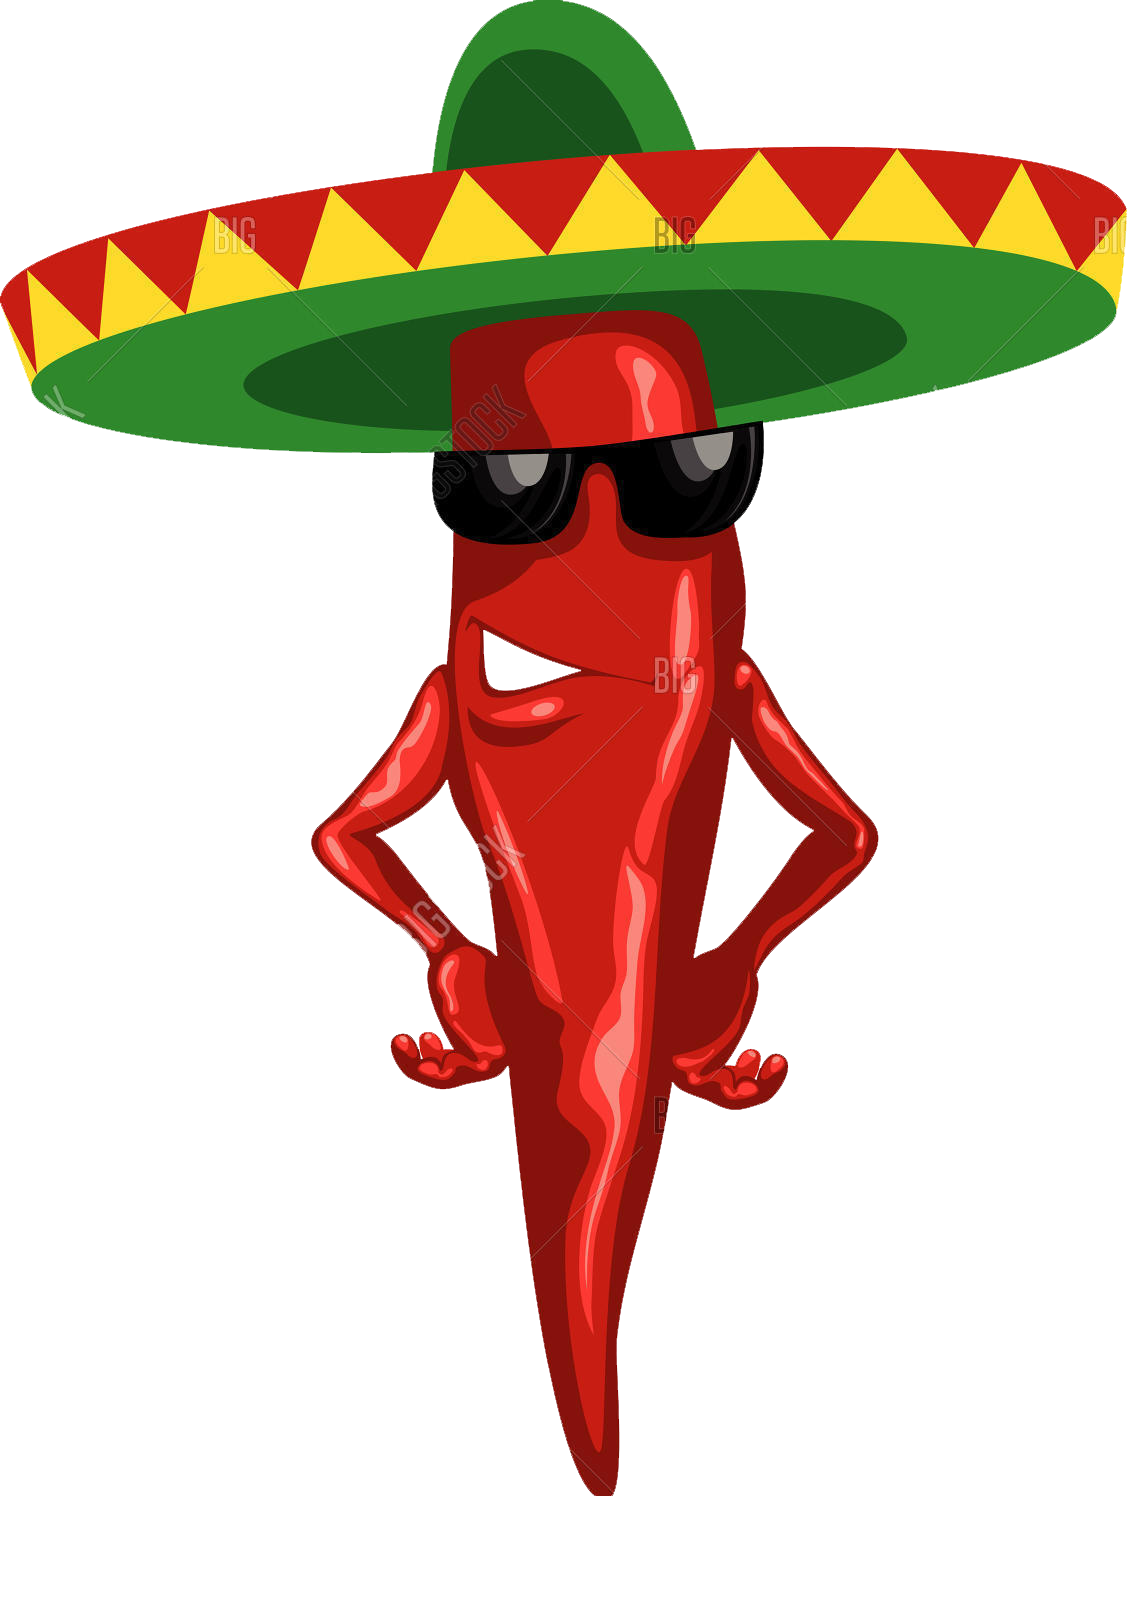 Cabo seafood grill cantina. Pepper clipart chili mexican